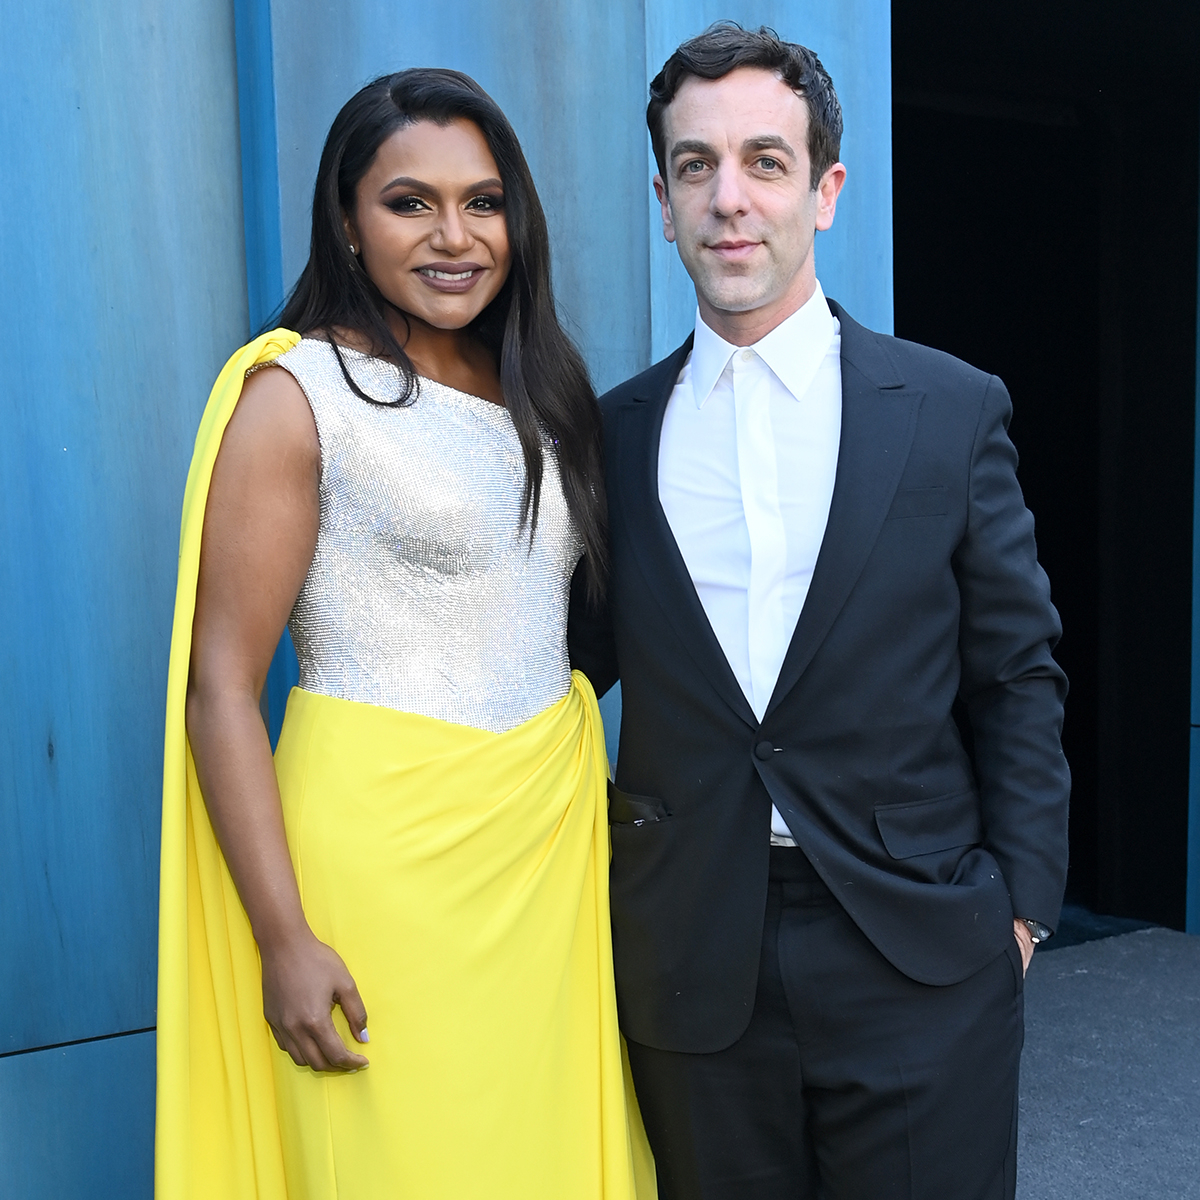 Mindy Kaling & B.J. Novak Are the Sweetest BFFs at Oscars After-Party